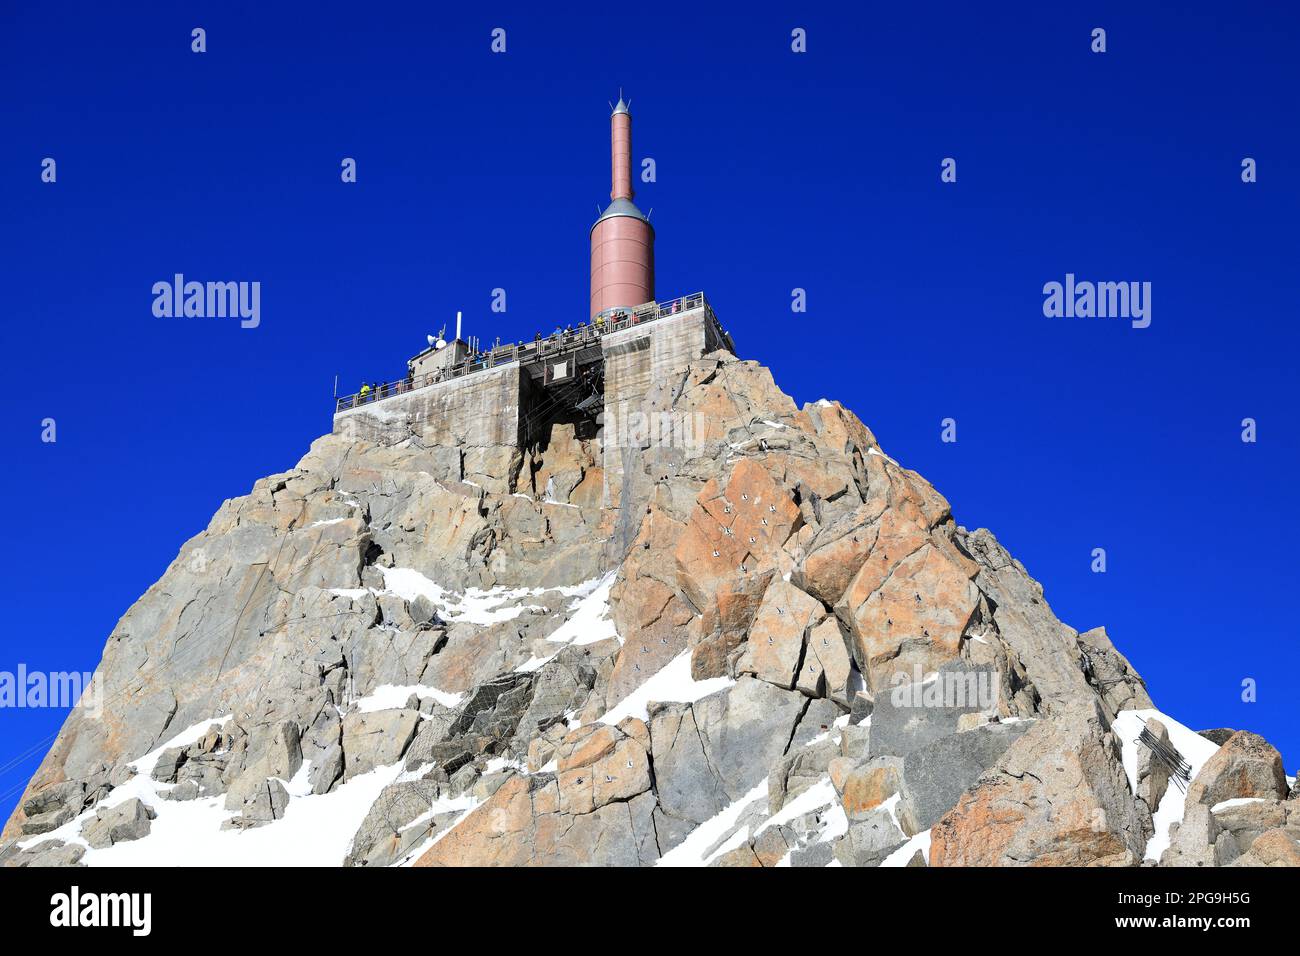 Aiguille du Midi - 3,842 m high peak in the Mont Blanc massif. French Alps, Europe. Stock Photo